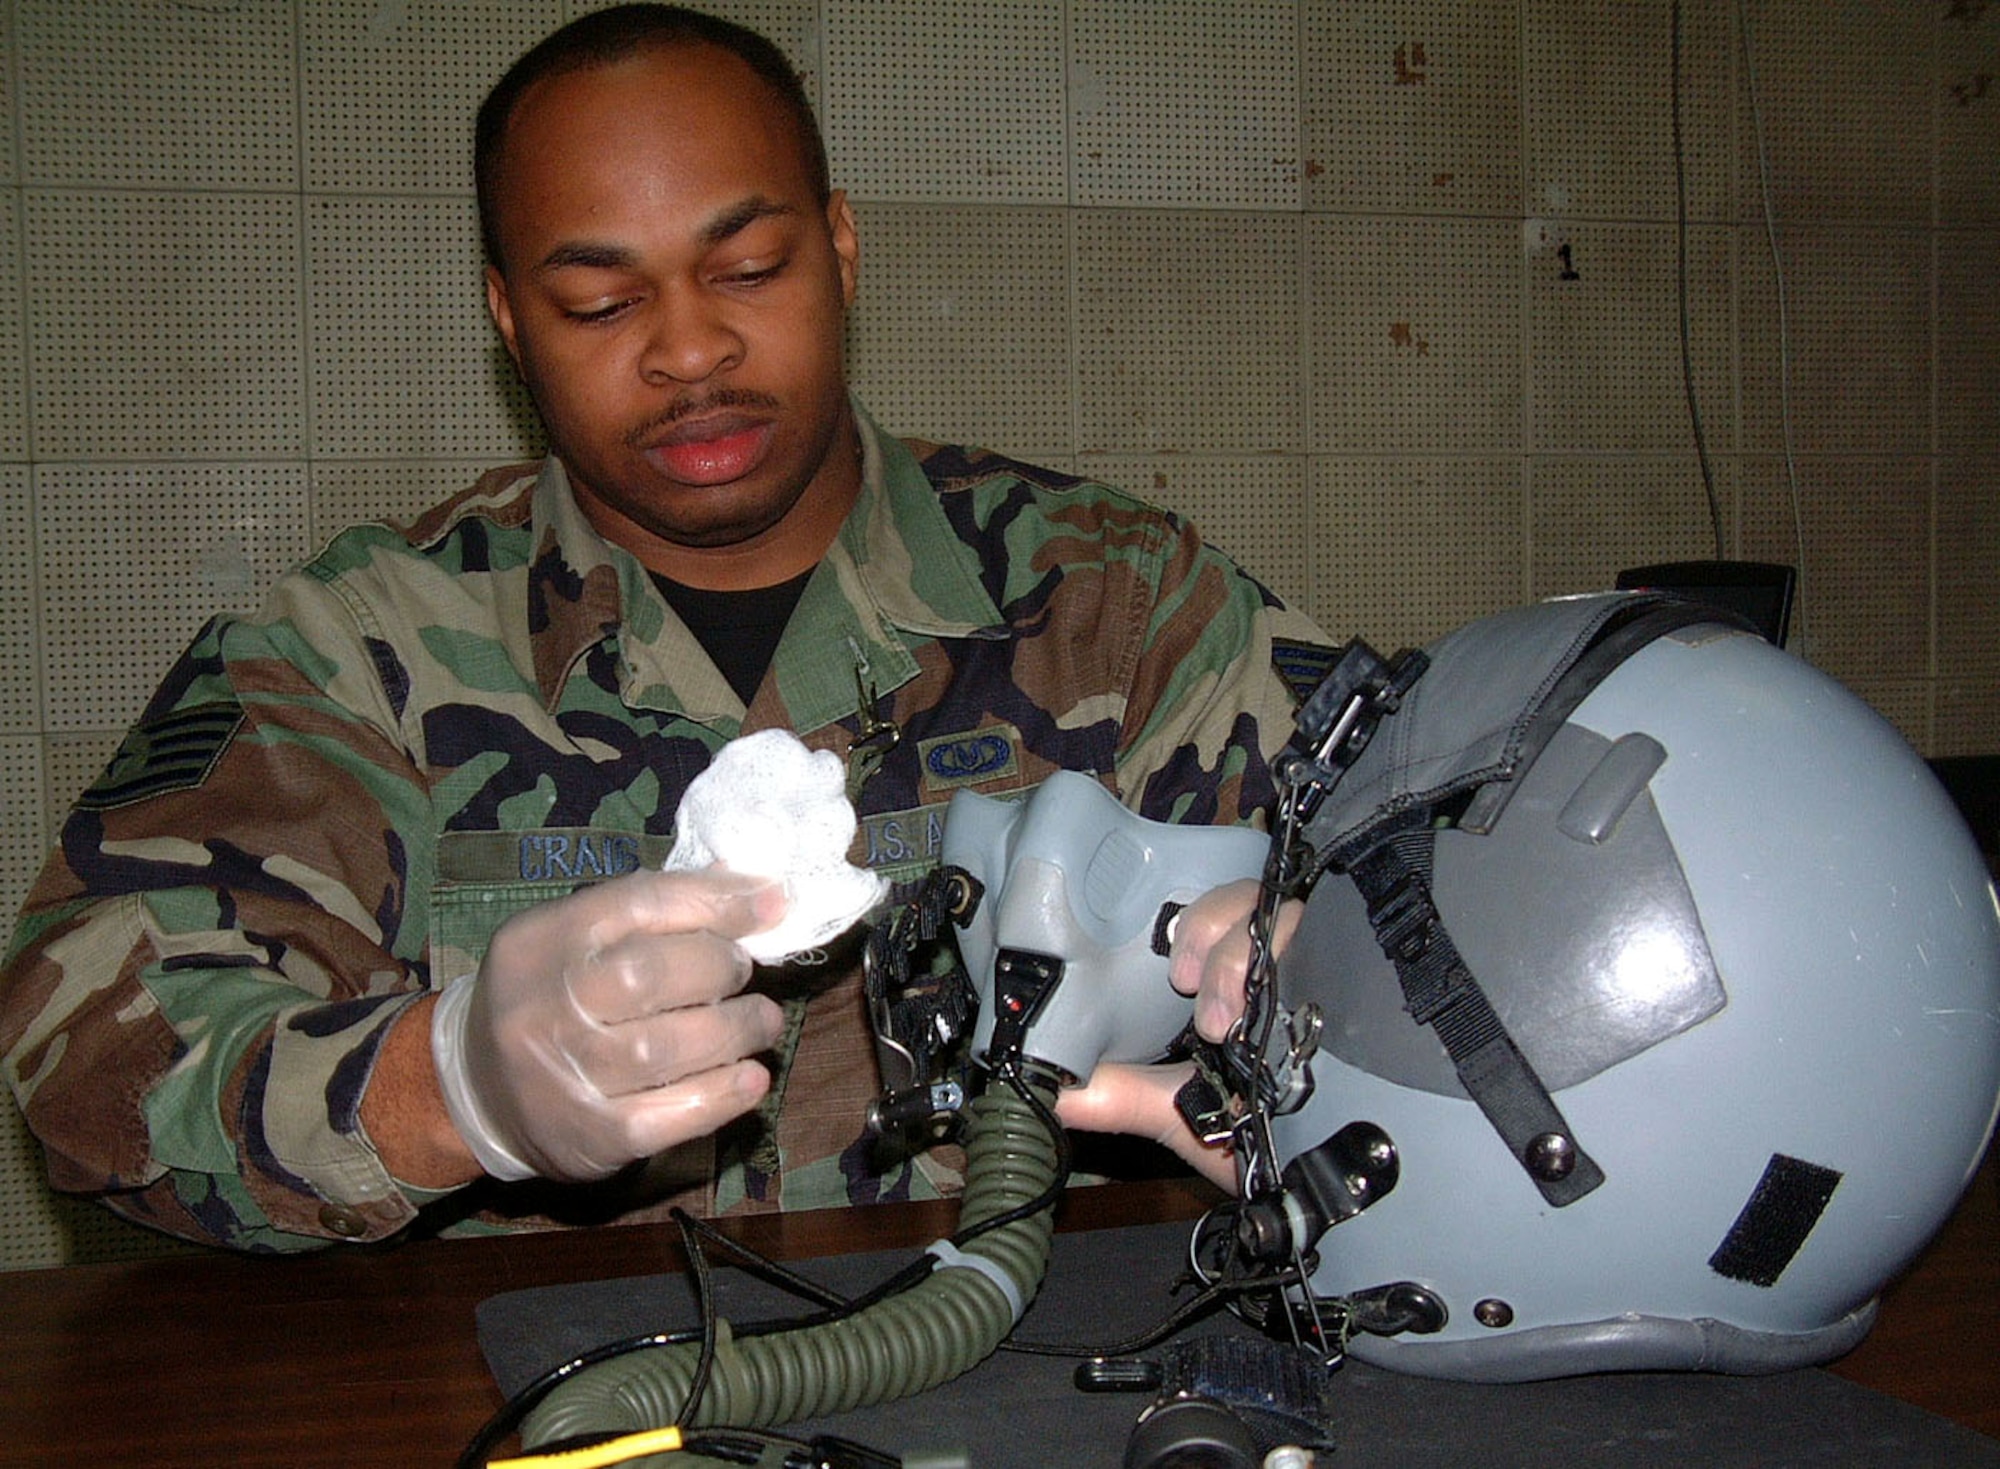 TAEGU AIR BASE, South Korea -- Staff Sgt. Christopher Craig cleans an oxygen mask.  He is deployed here from the 353rd Special Operations Group life support section at Kadena Air Base, Japan.  Life support airmen maintain all life-sustaining gear used by aircrews including chemical and biological protection suits, helmets and night-vision goggles. (U.S. Air Force photo by Master Sgt. Michael Farris)